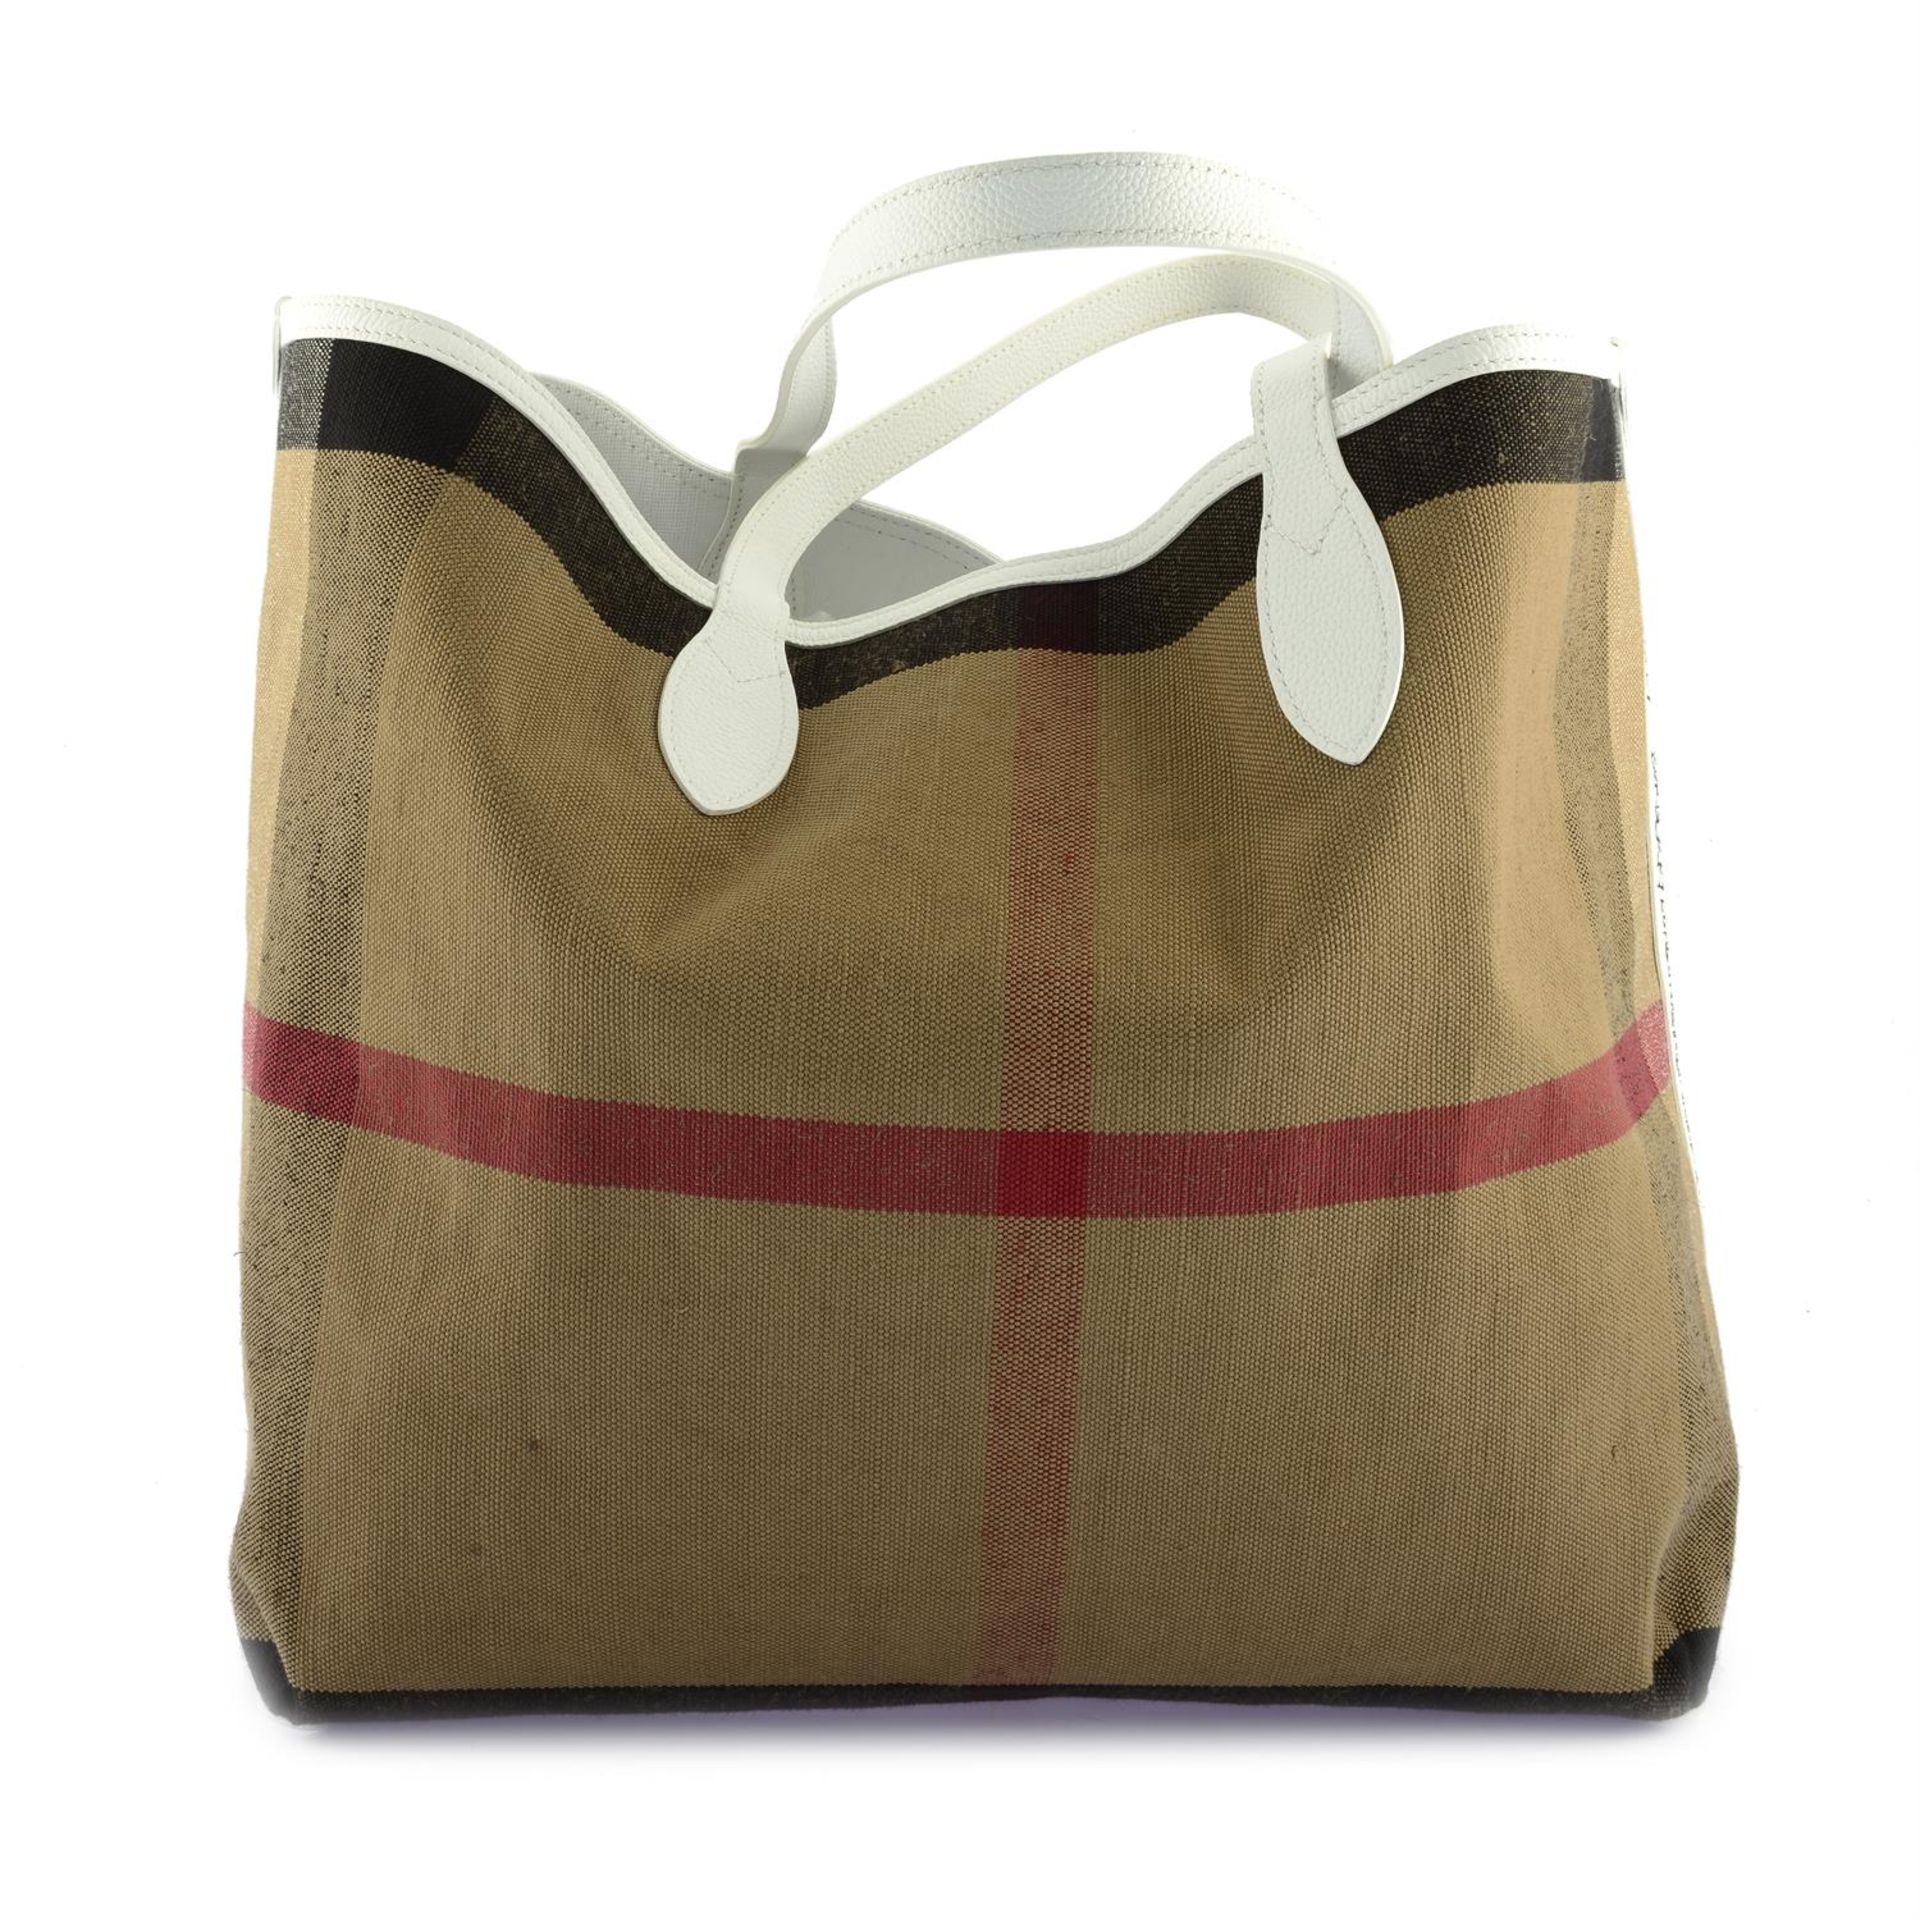 BURBERRY - a Doodle reversible shopping tote. - Image 3 of 10